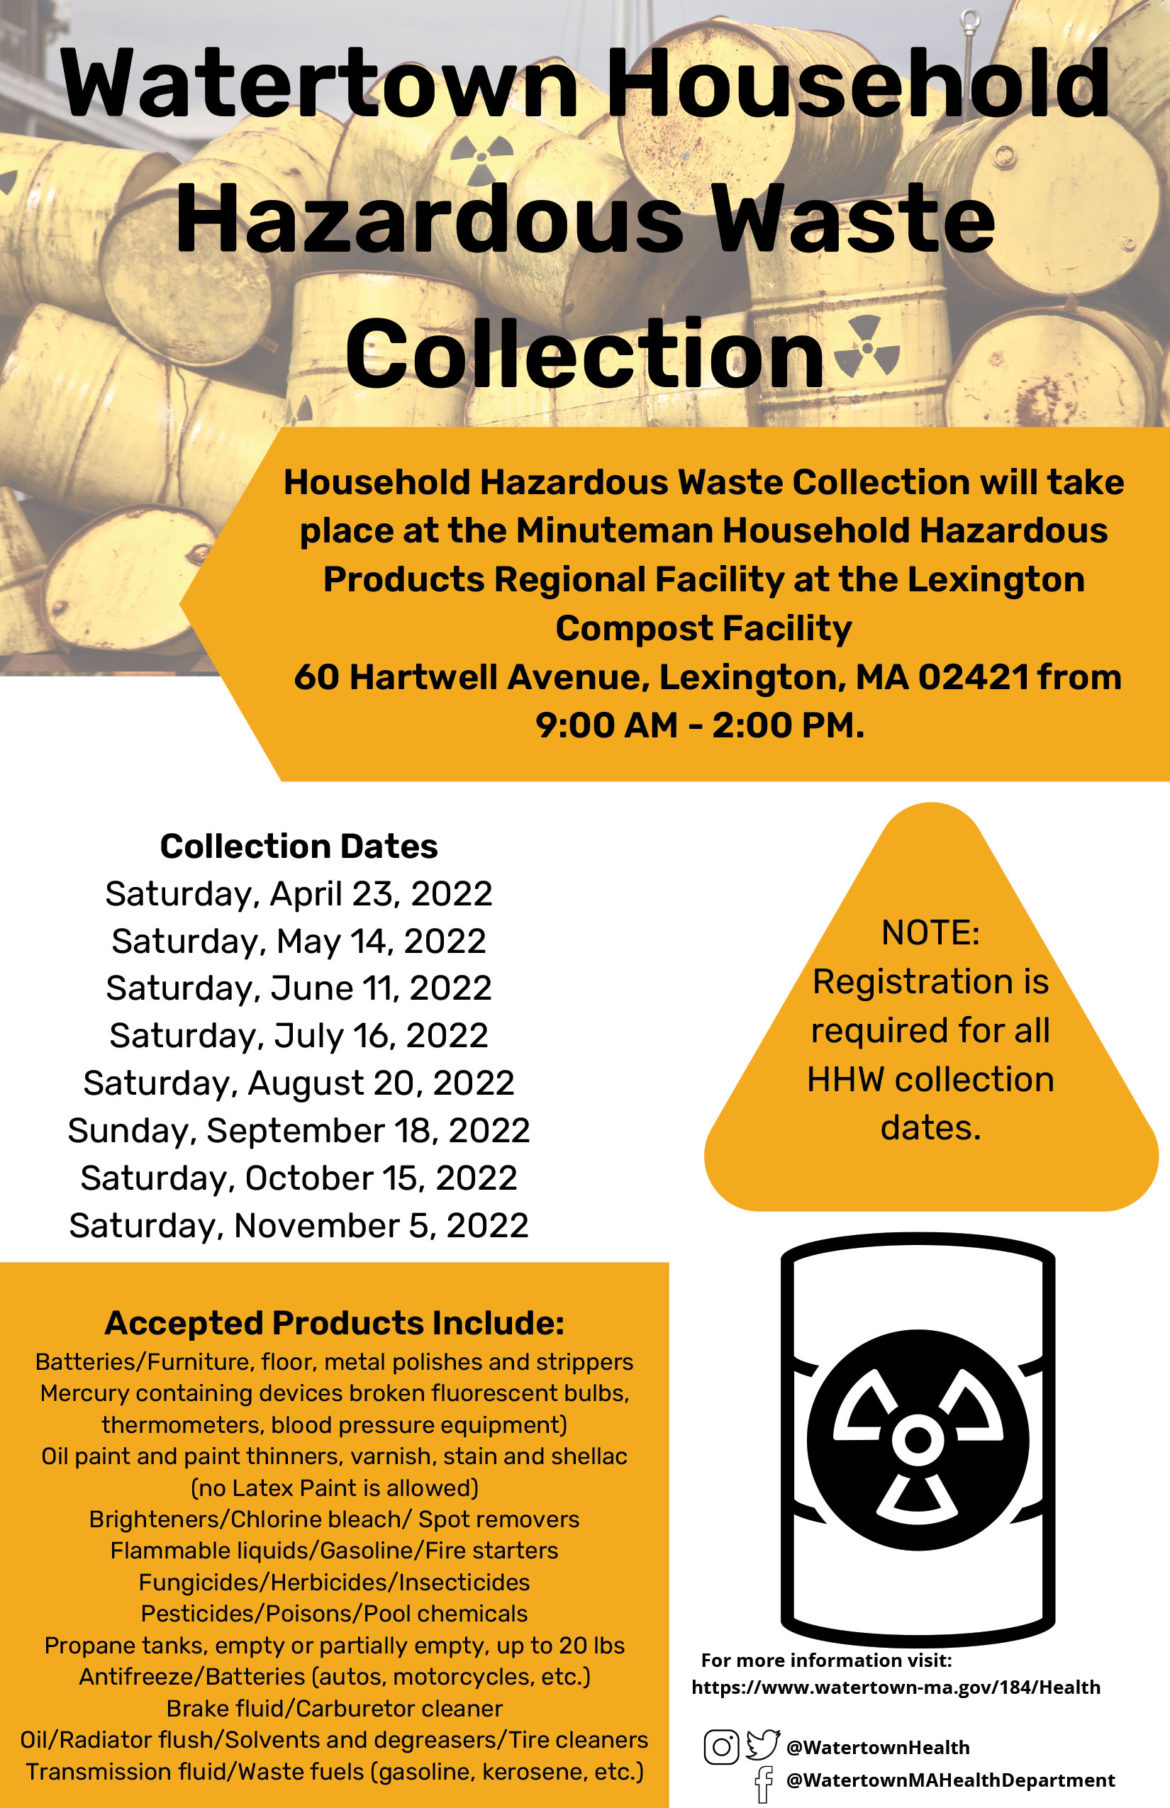 Residents Can Dispose of Household Hazardous Waste, Preregistration